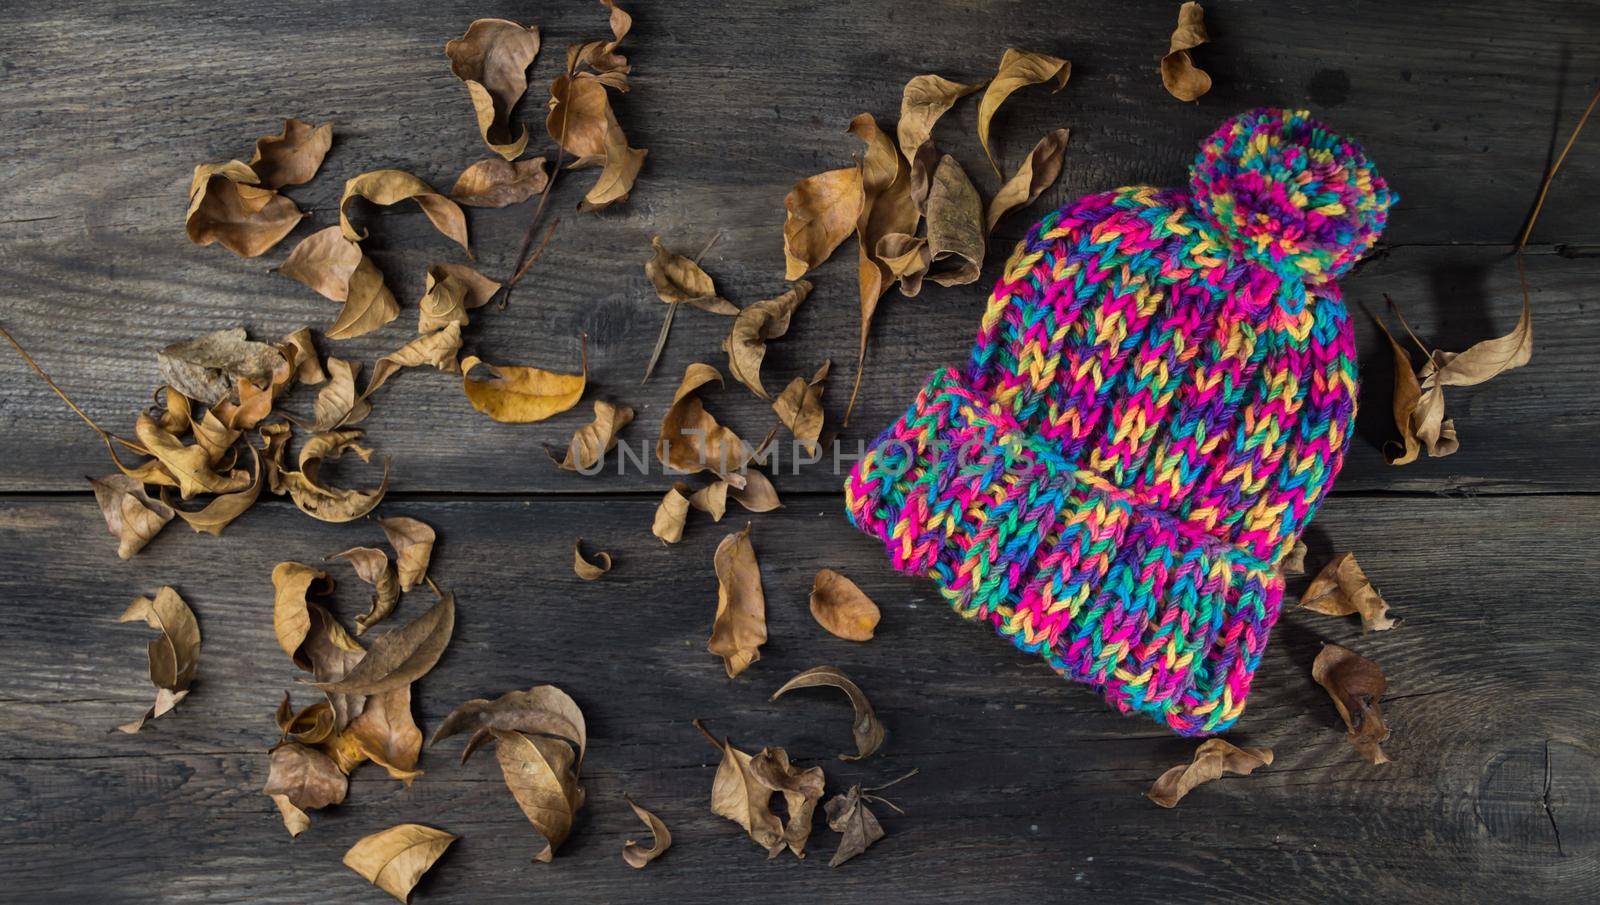 hand knitted wool hats on rustic wooden background and autumn leaves by GabrielaBertolini